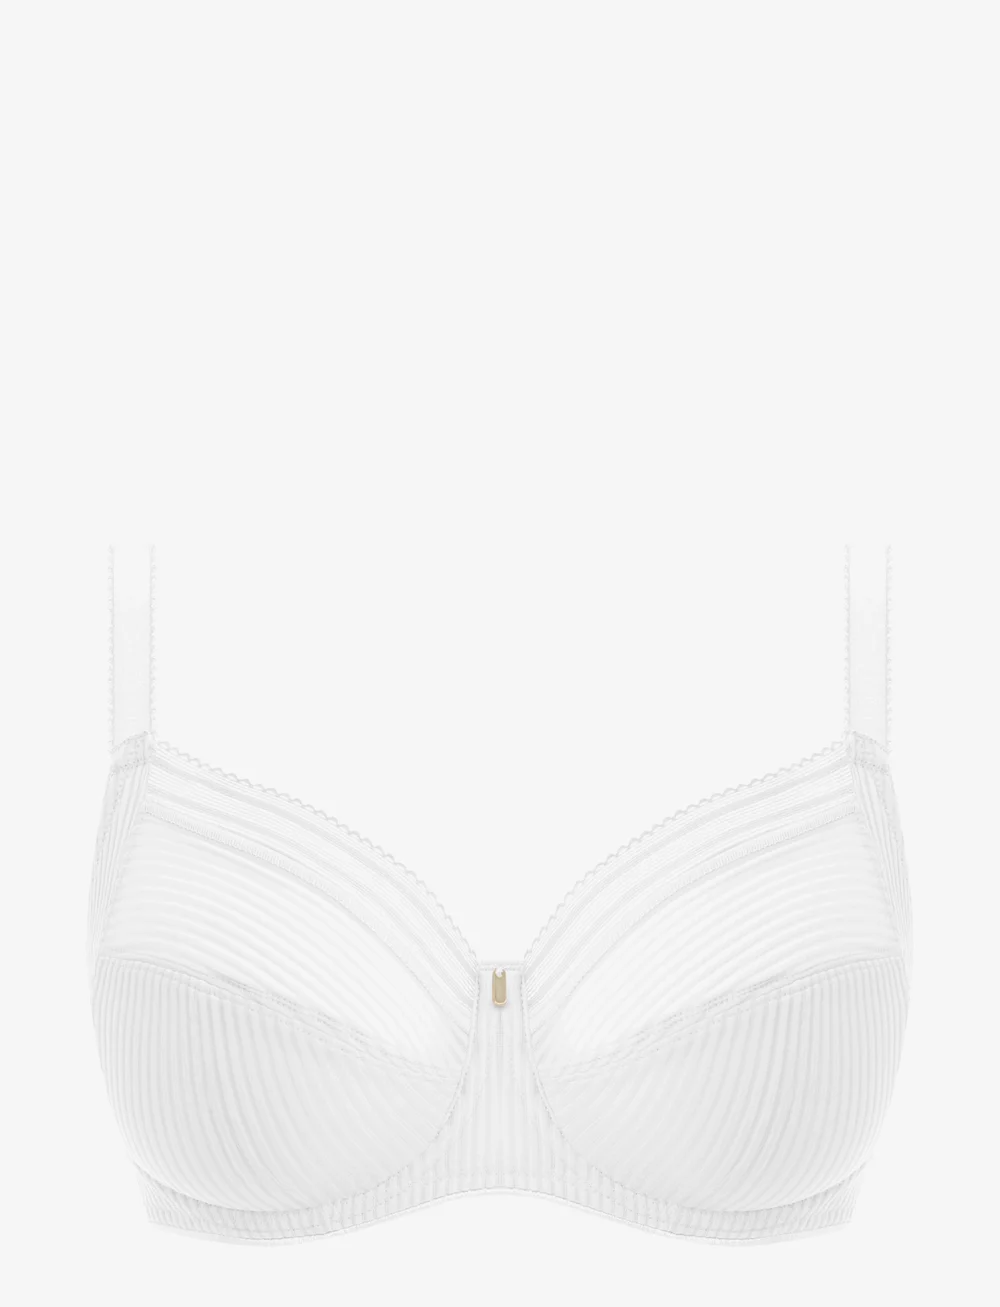 Fantasie Fusion Underwired Full Cup Side Support Bra - White